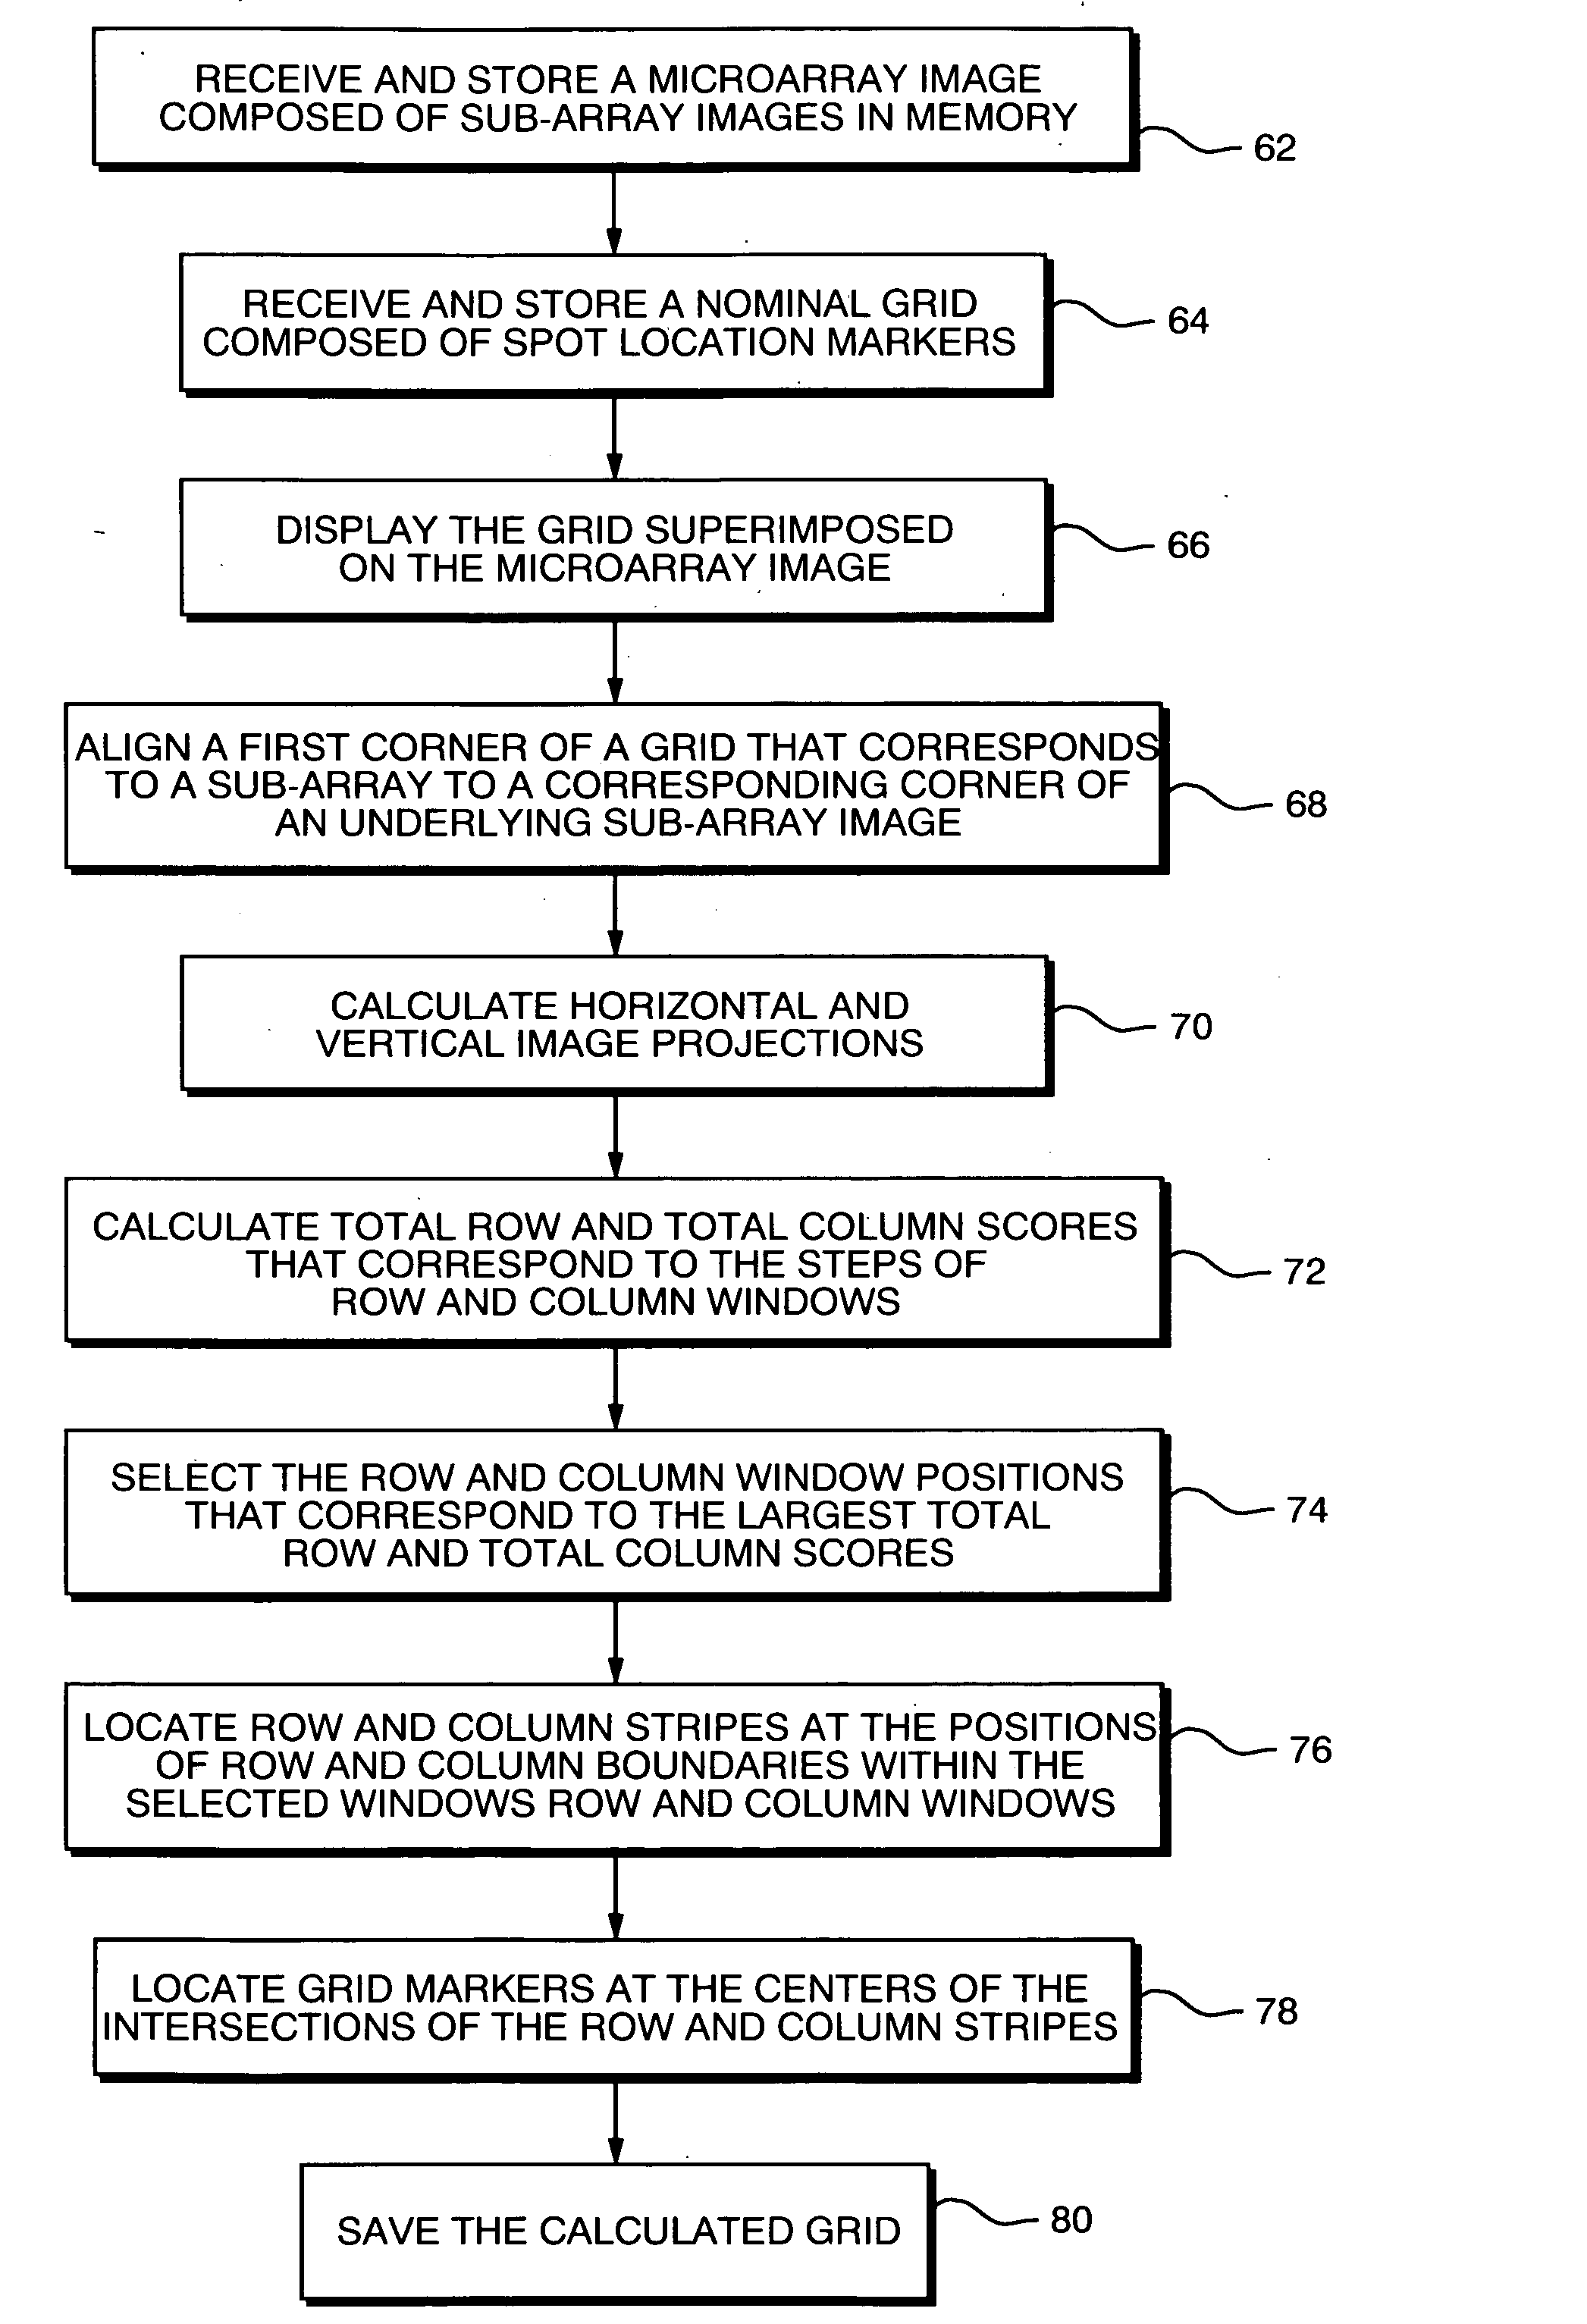 Method and apparatus for automatically segmenting a microarray image